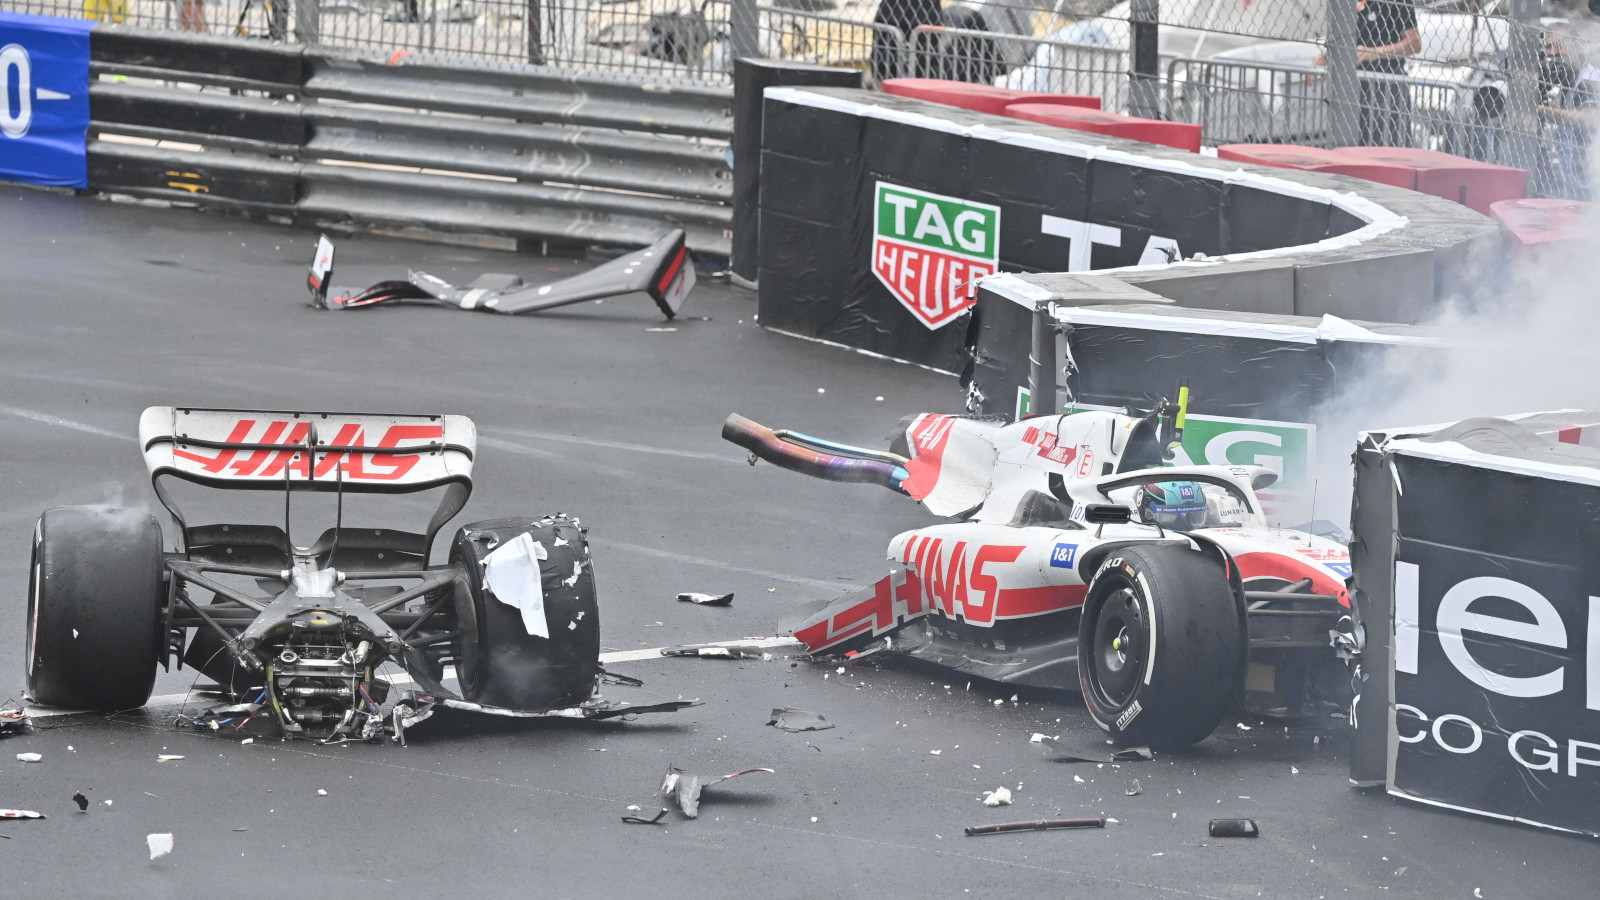 Mick Schumacher sitting in his car in the immediate aftermath of his crash. Monaco May 2022